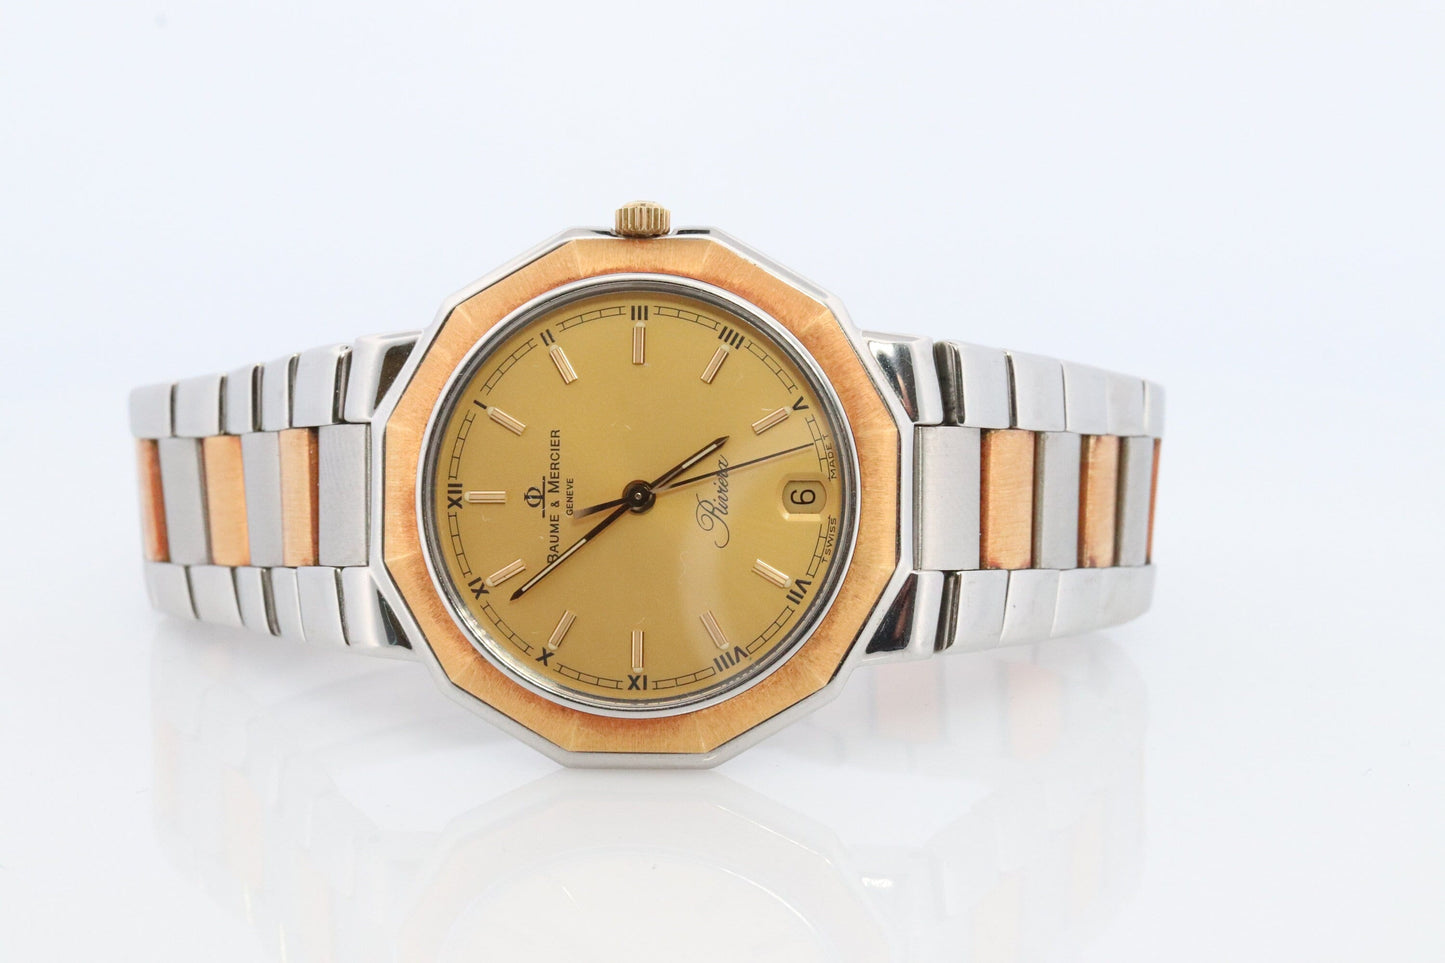 Vintage Baume and Mercier watch. Baume Mercier 5131.3 Riviera Yellow Gold Stainless Steel. Two Tone Color Date watch